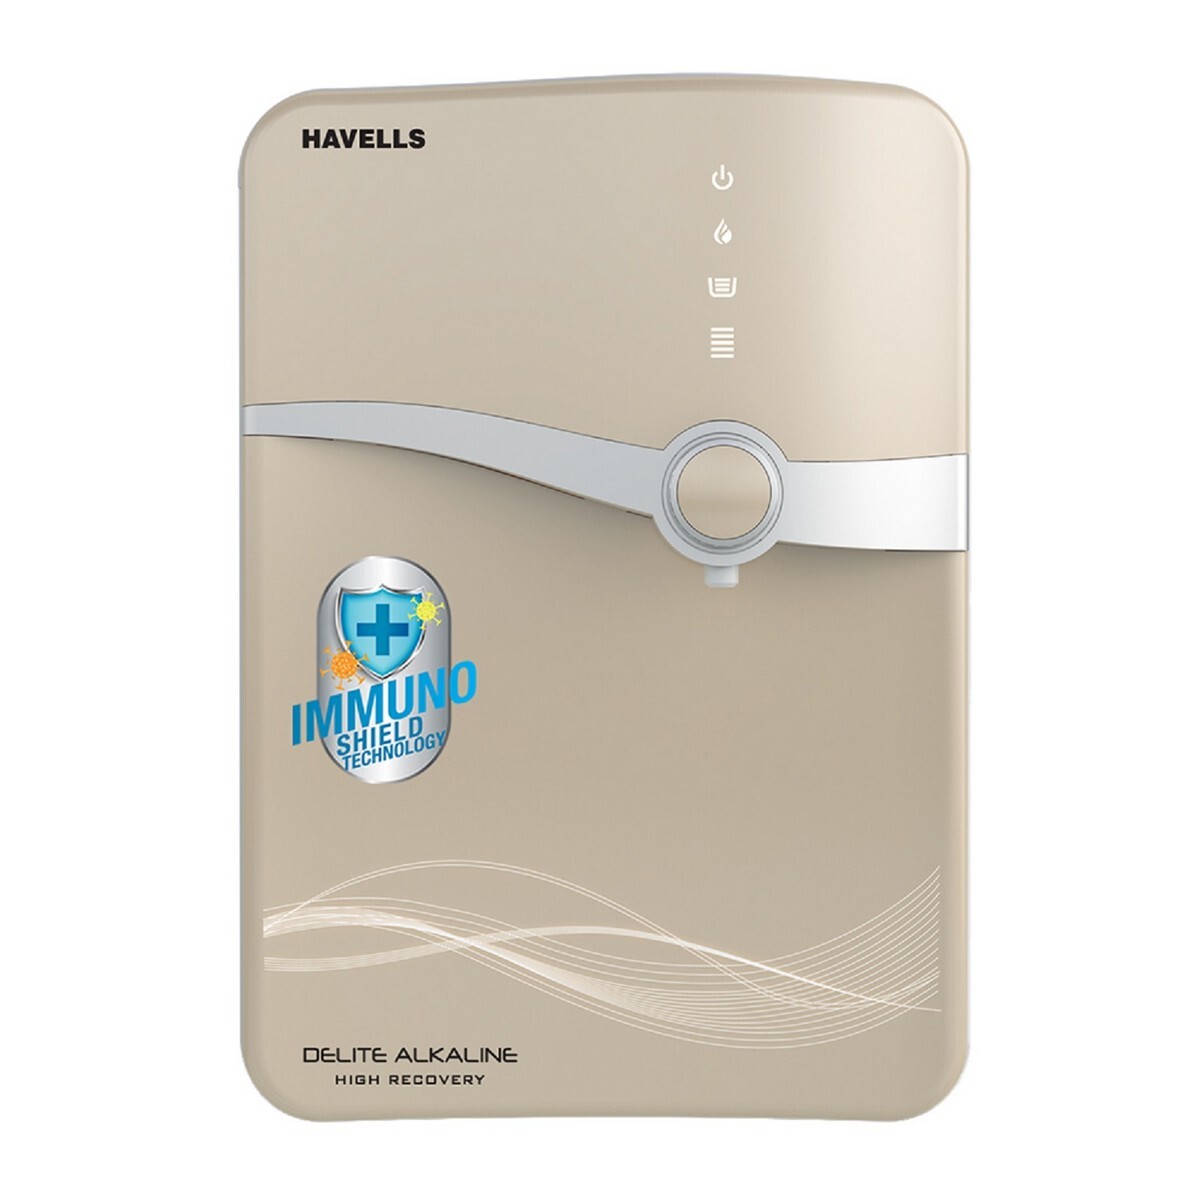 Havells Water Purifier Delite Alkaline High Recovery